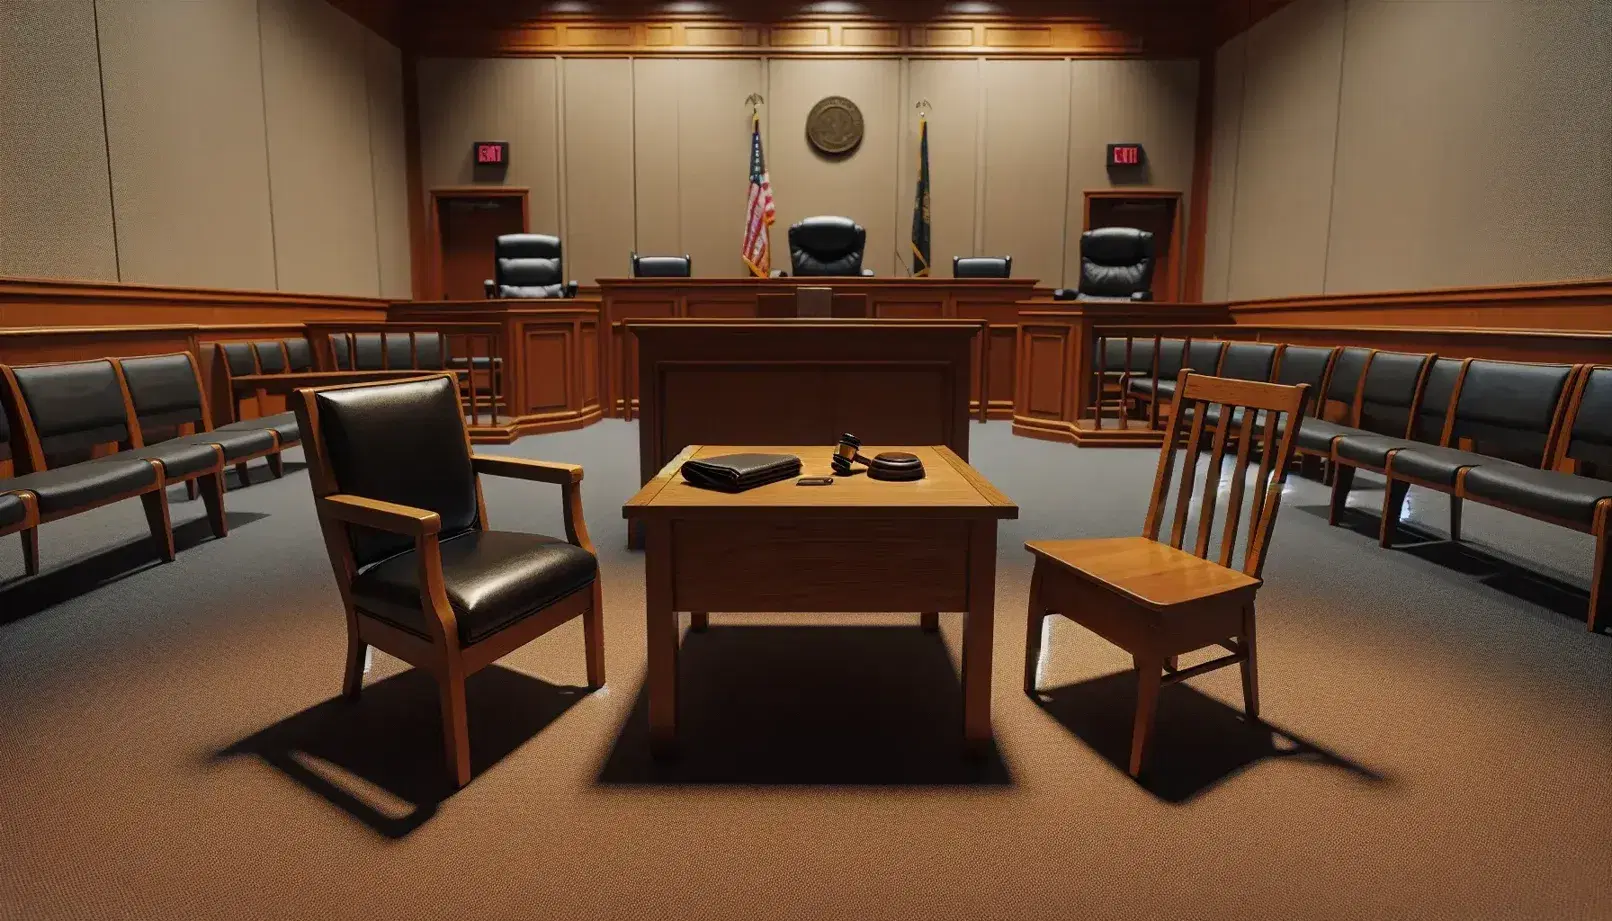 Juvenile courtroom with wooden judge's desk, black leather chair, table with chairs and public gallery on blue carpet.